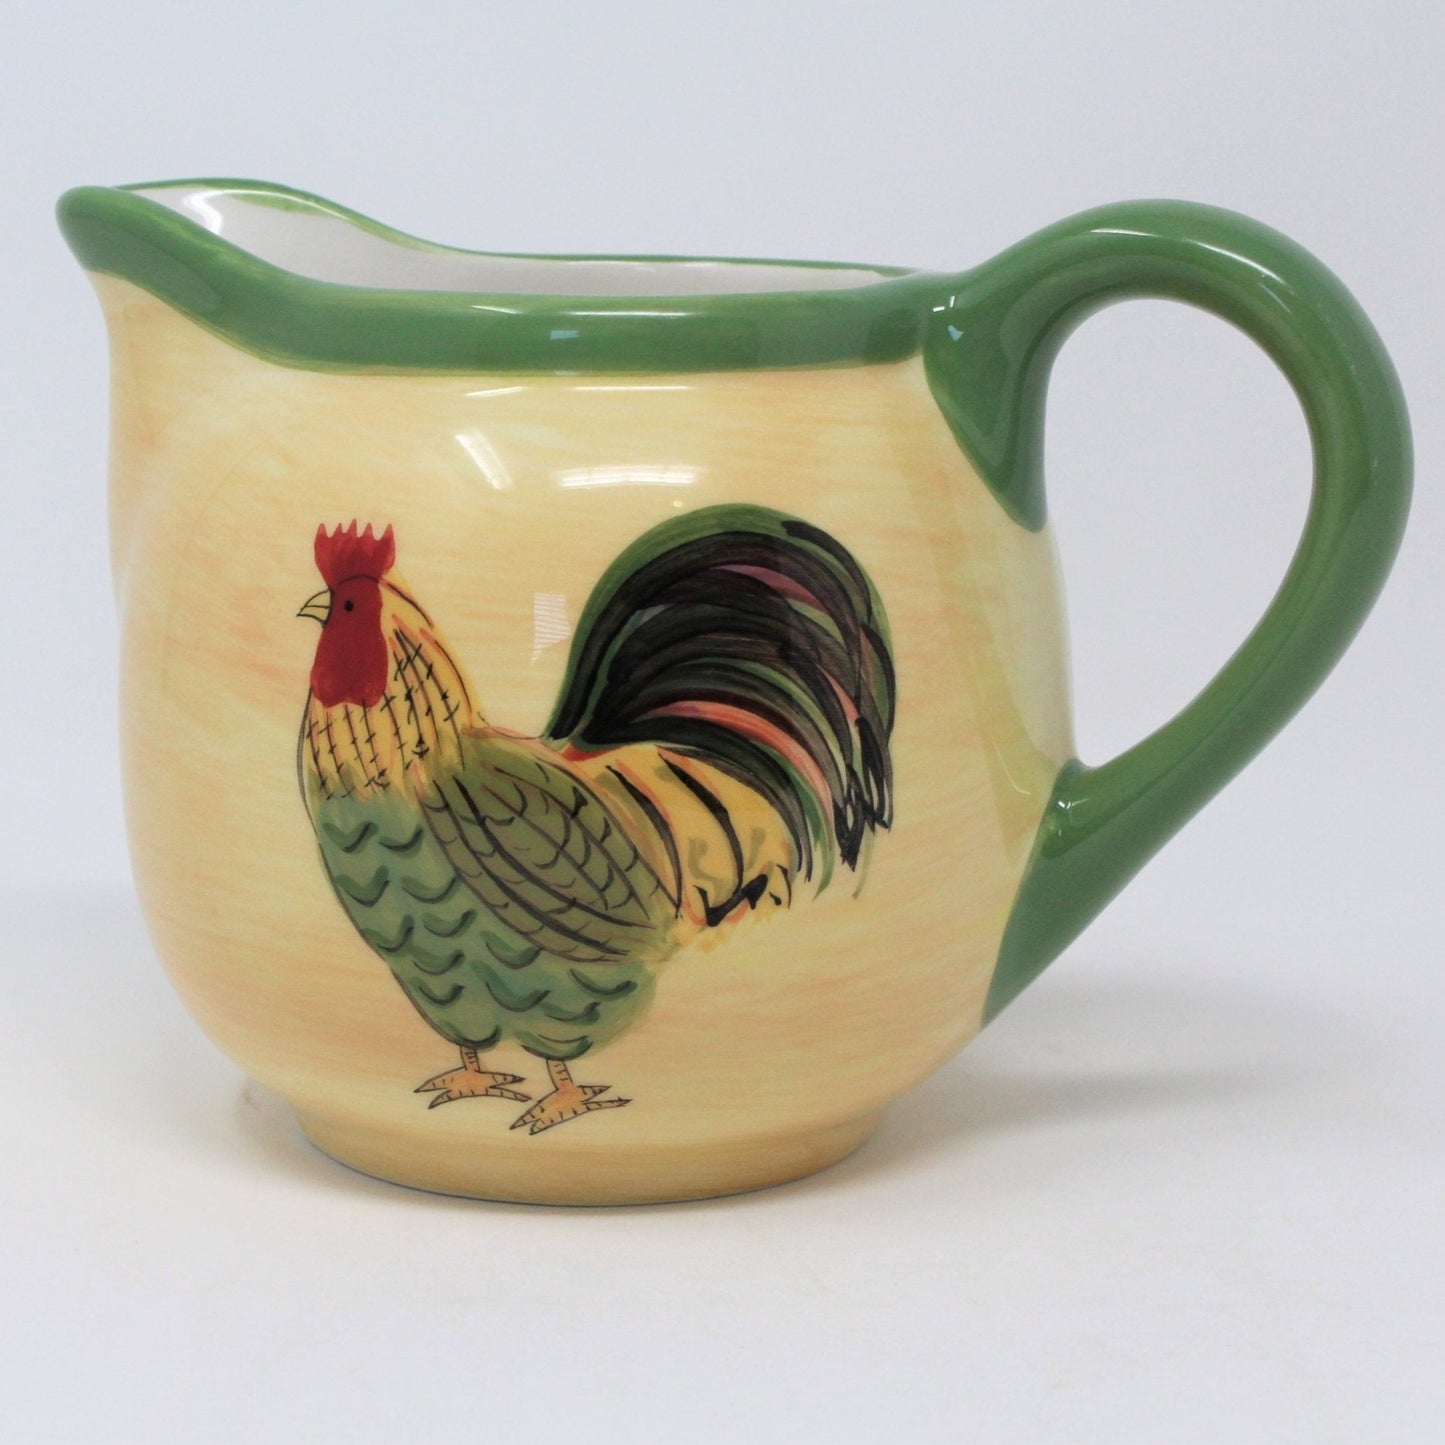 Creamer, Pfaltzgraff, Napoli Rooster, Stoneware, Hand Painted